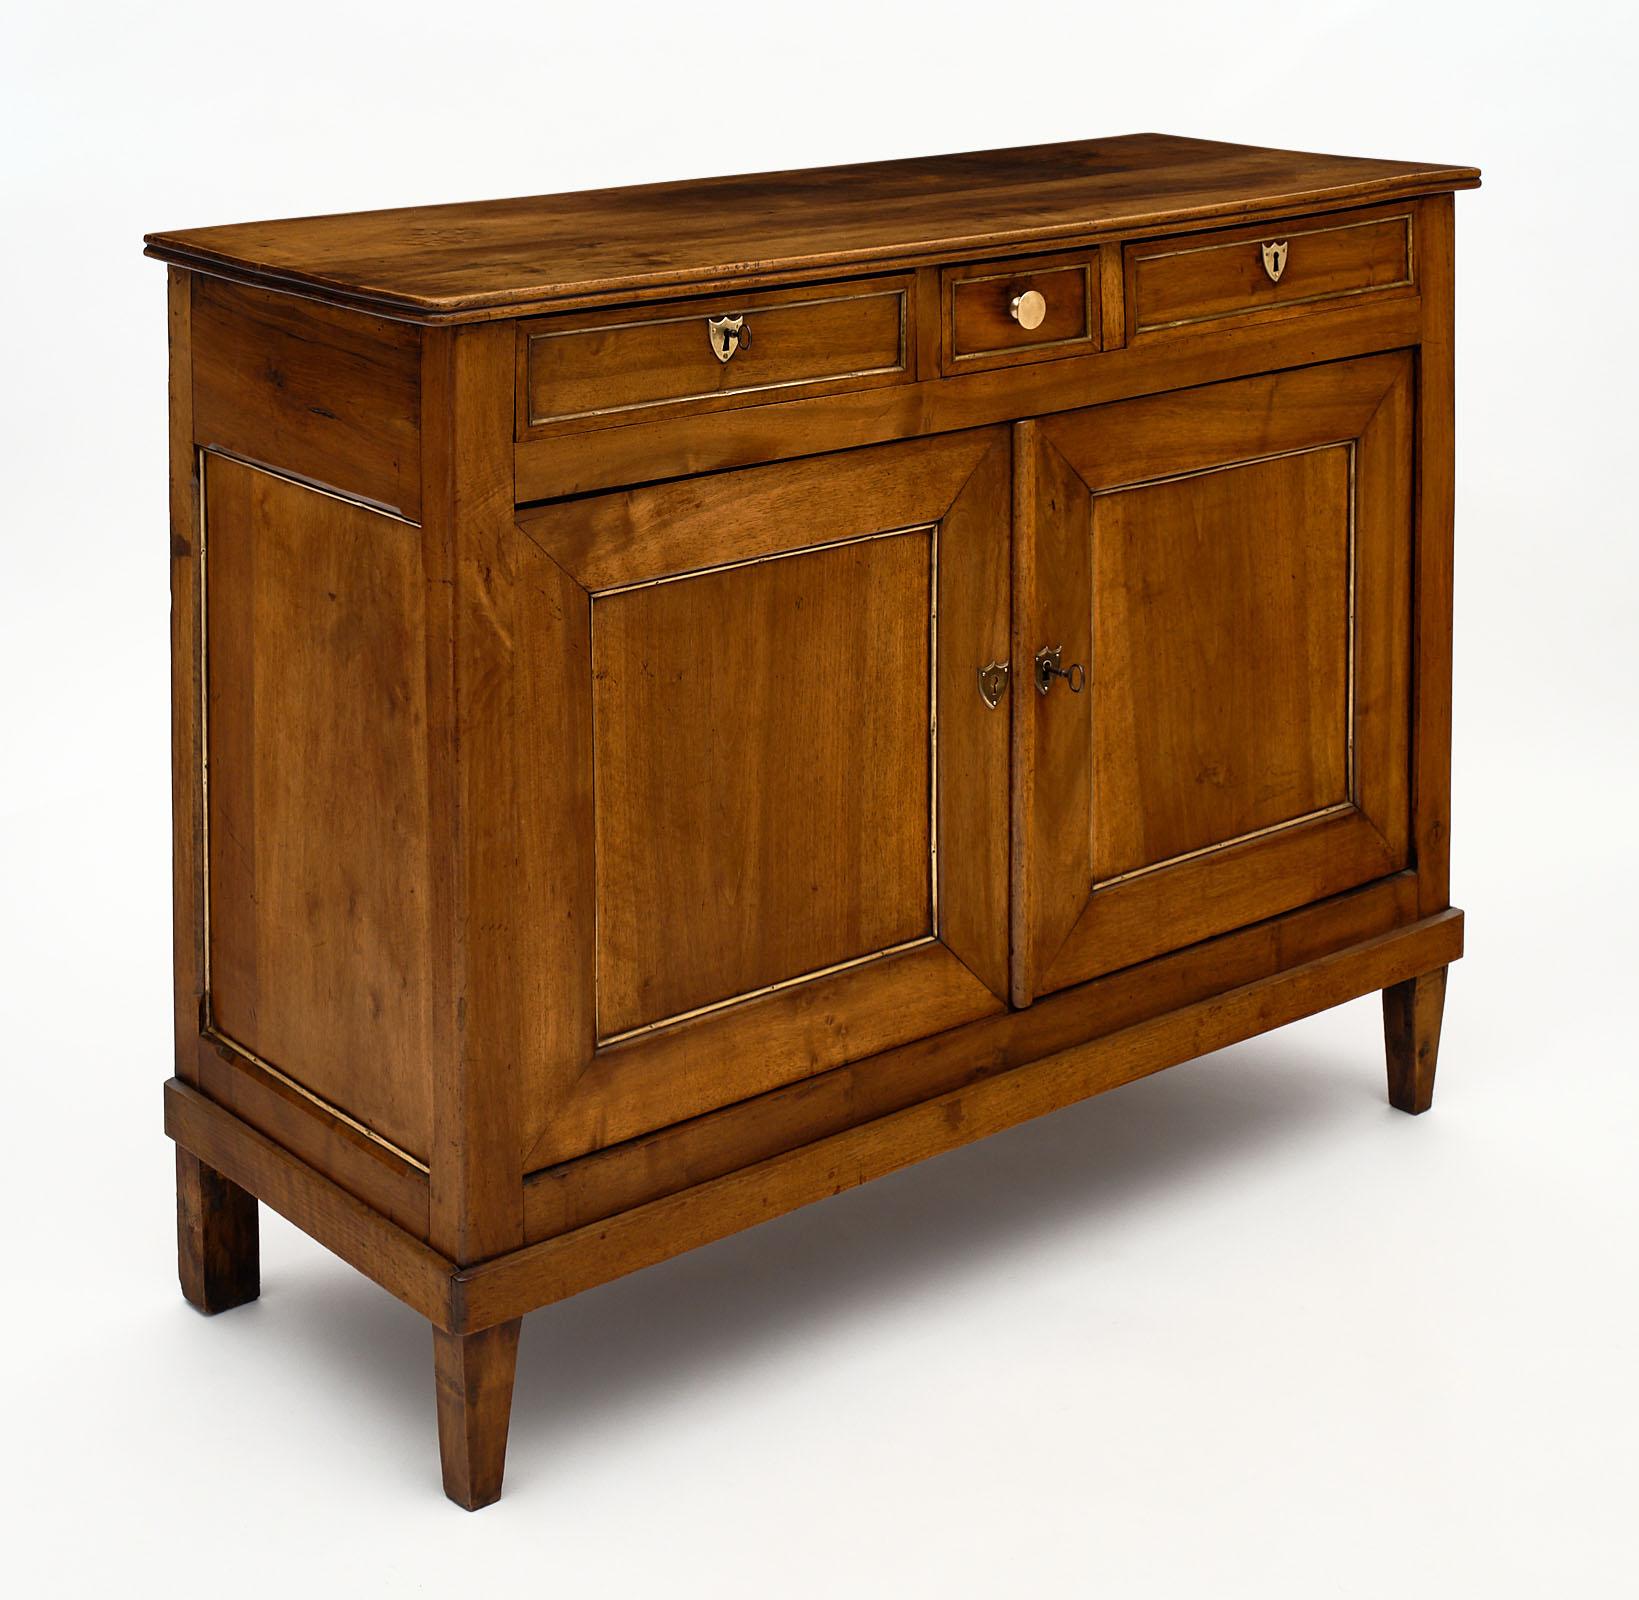 Directoire period antique French buffet made of solid walnut and featuring three dovetailed drawers above two doors. The doors open to reveal interior shelving. We love the tapered legs and clean lines of this classic piece. The doors and sides are